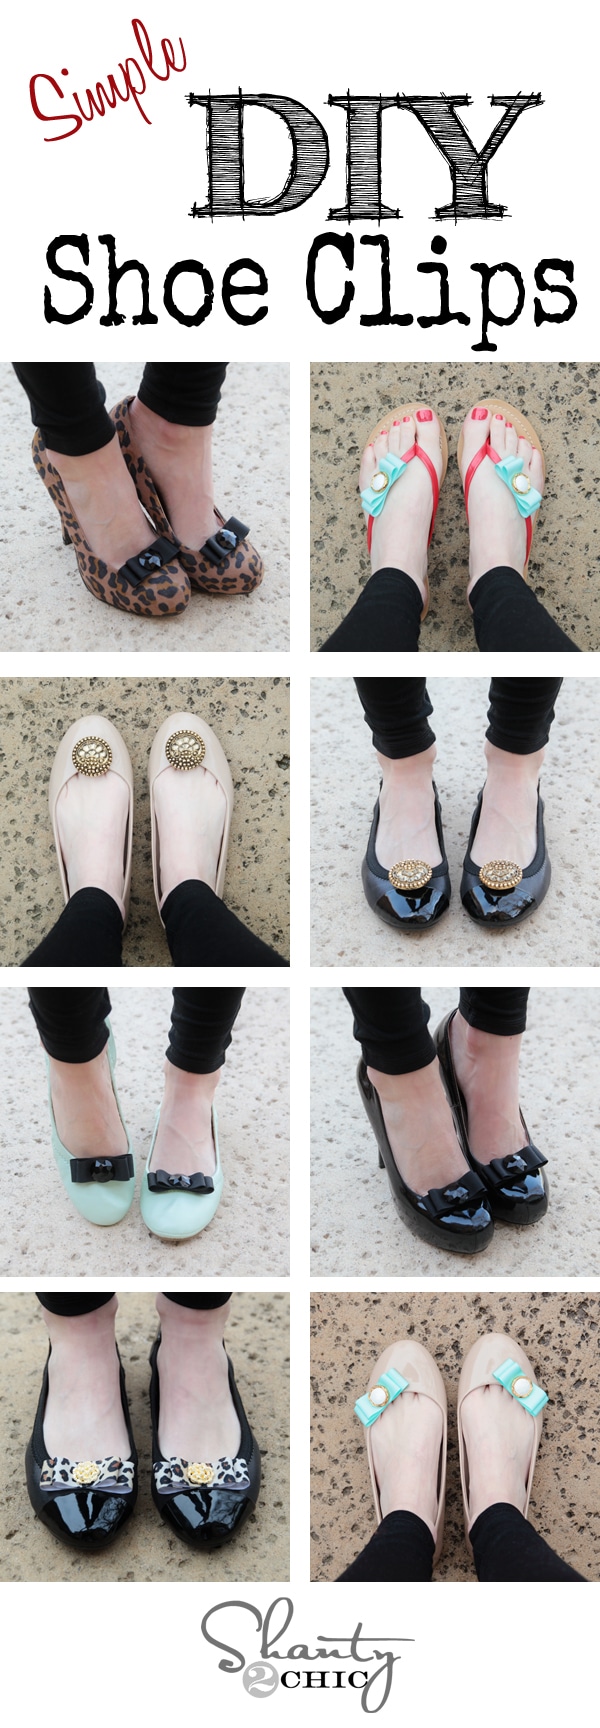 Create the Perfect Shoes for Any Occasion with These Great DIY Shoe Clips